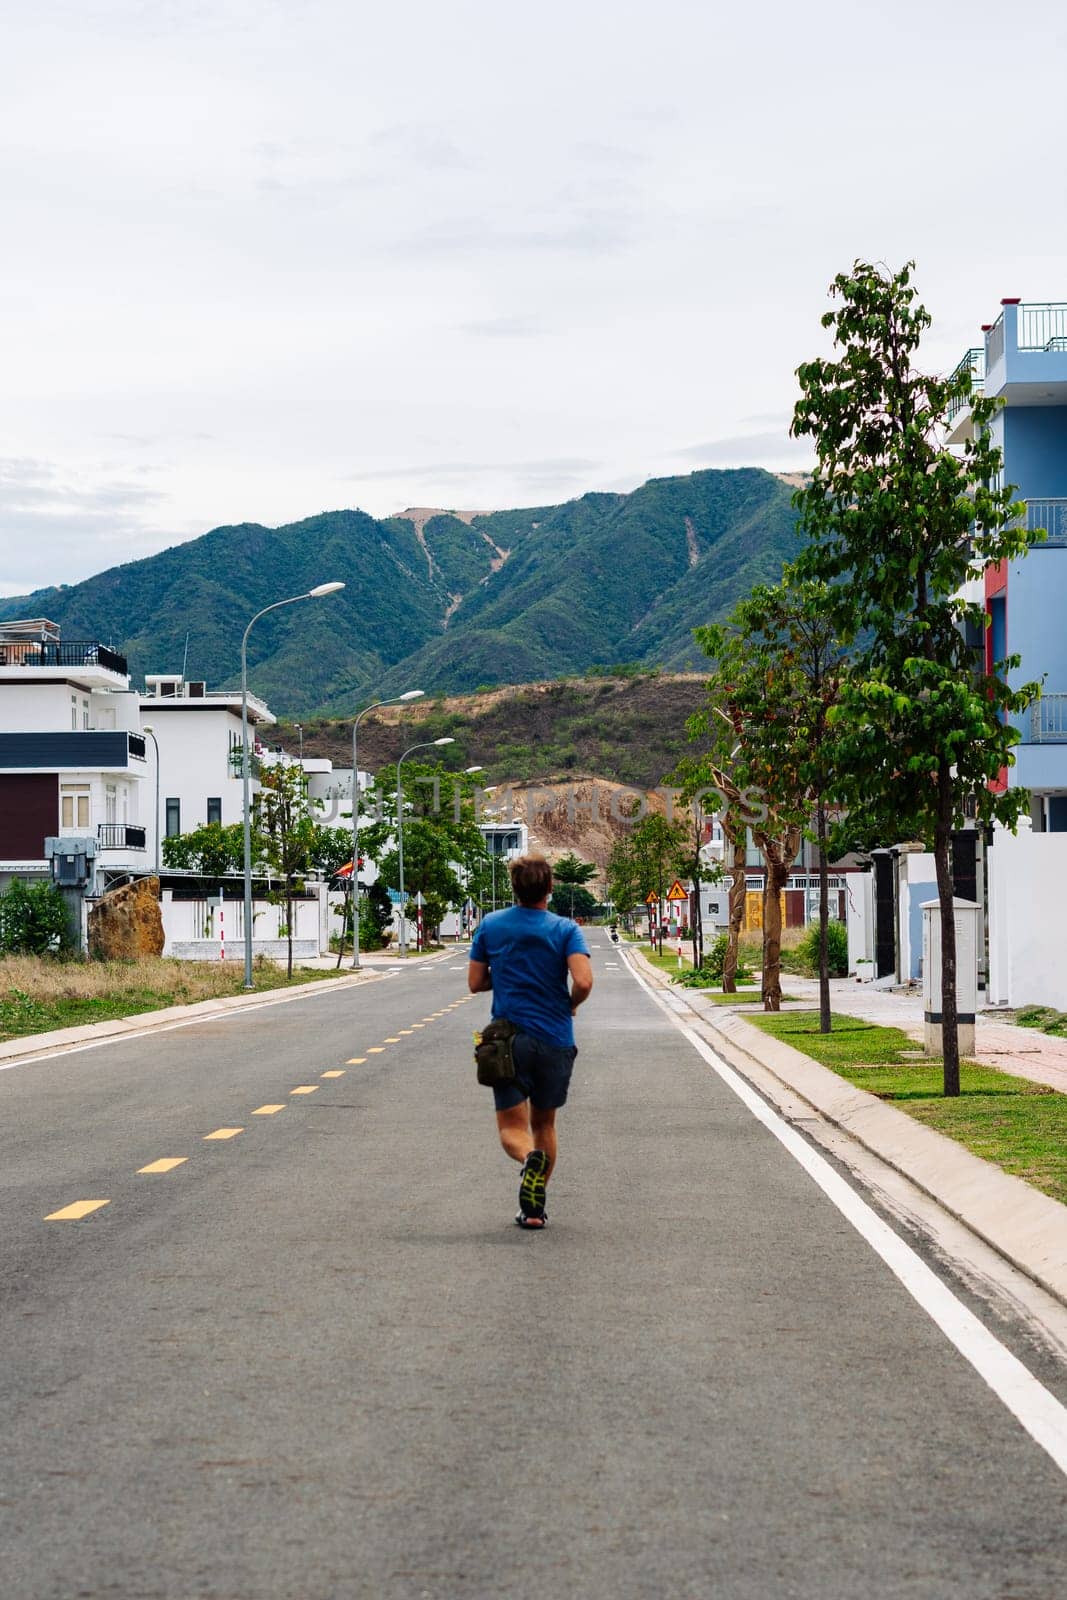 A man runs down a road in the city mountain VERTICAL FORMAT BACK VIEW.